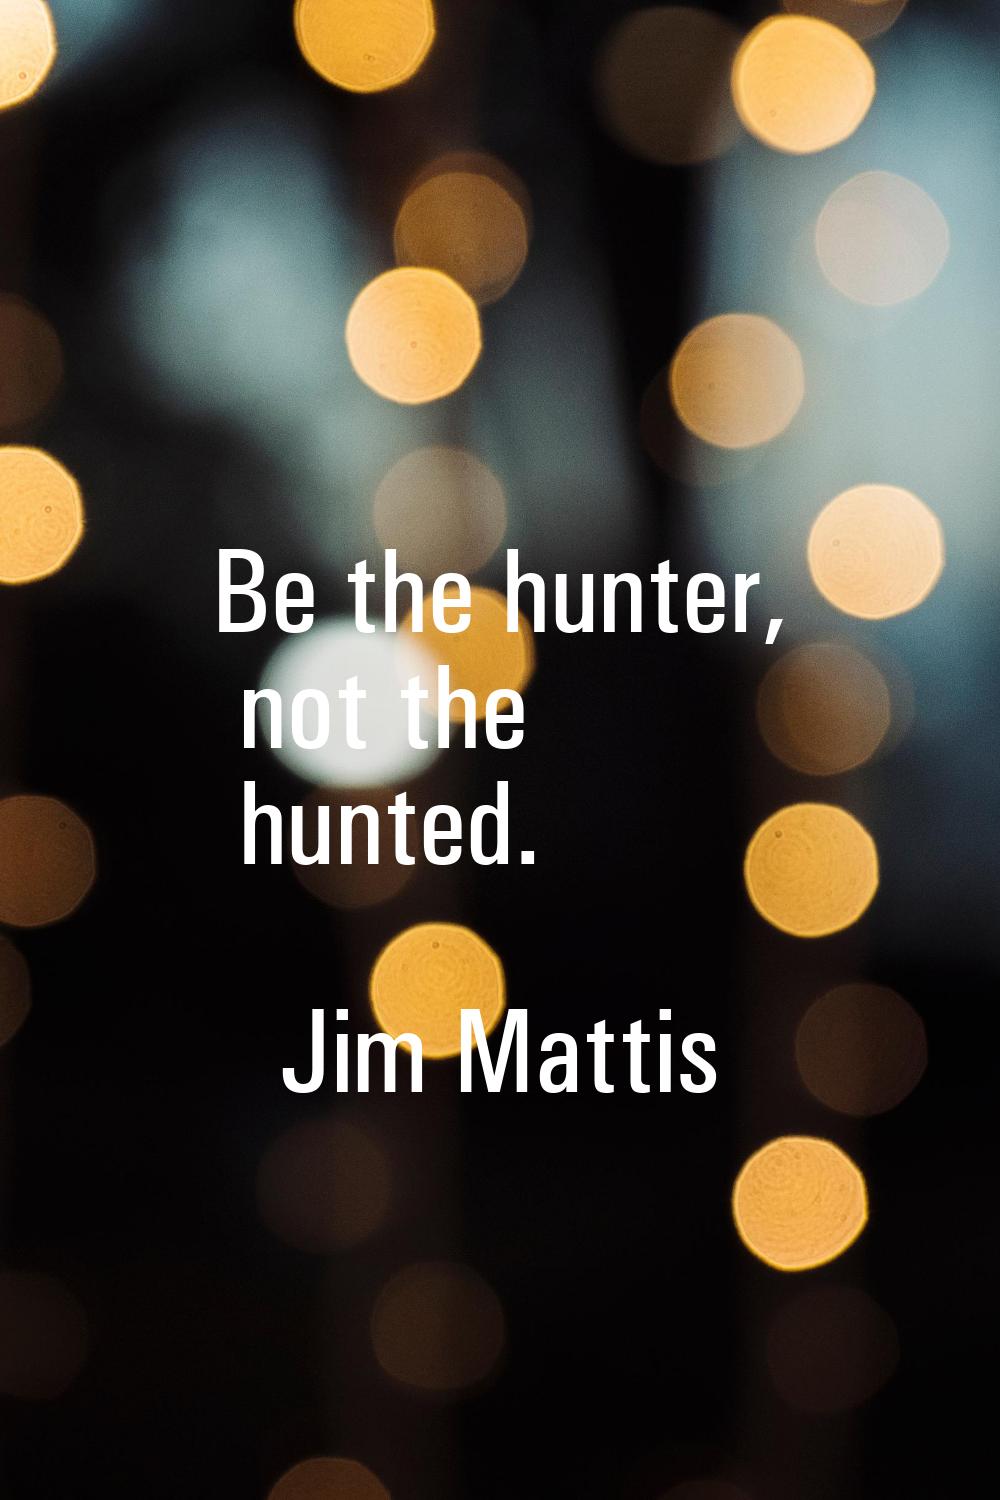 Be the hunter, not the hunted.